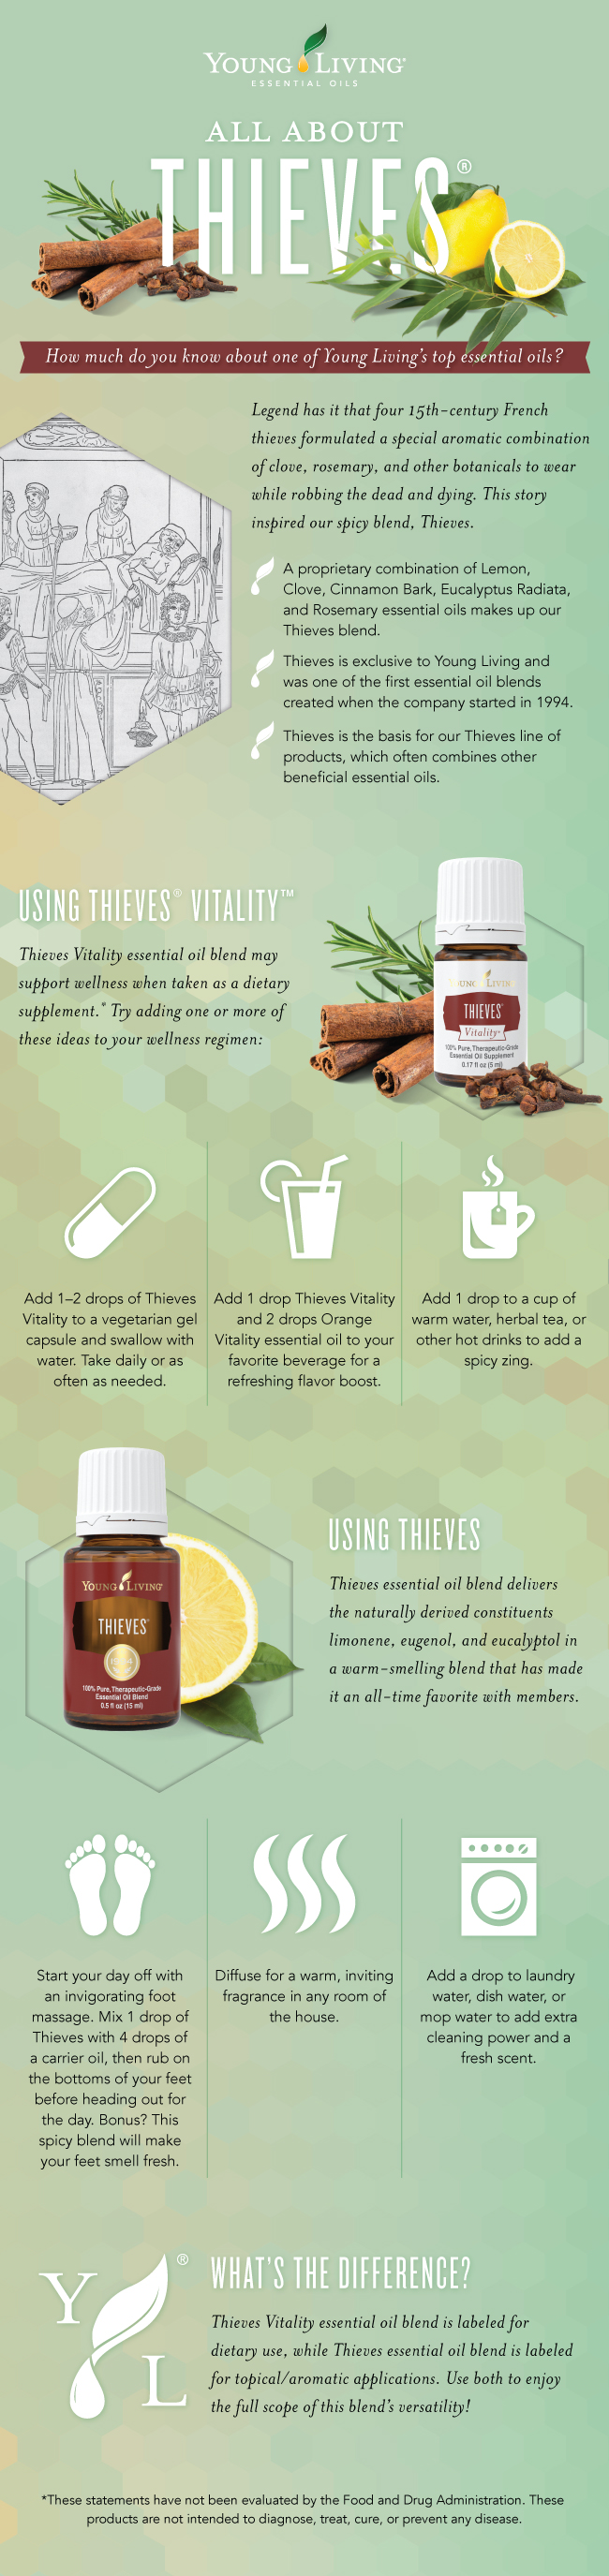 Young Living All About Thieves_Infographic